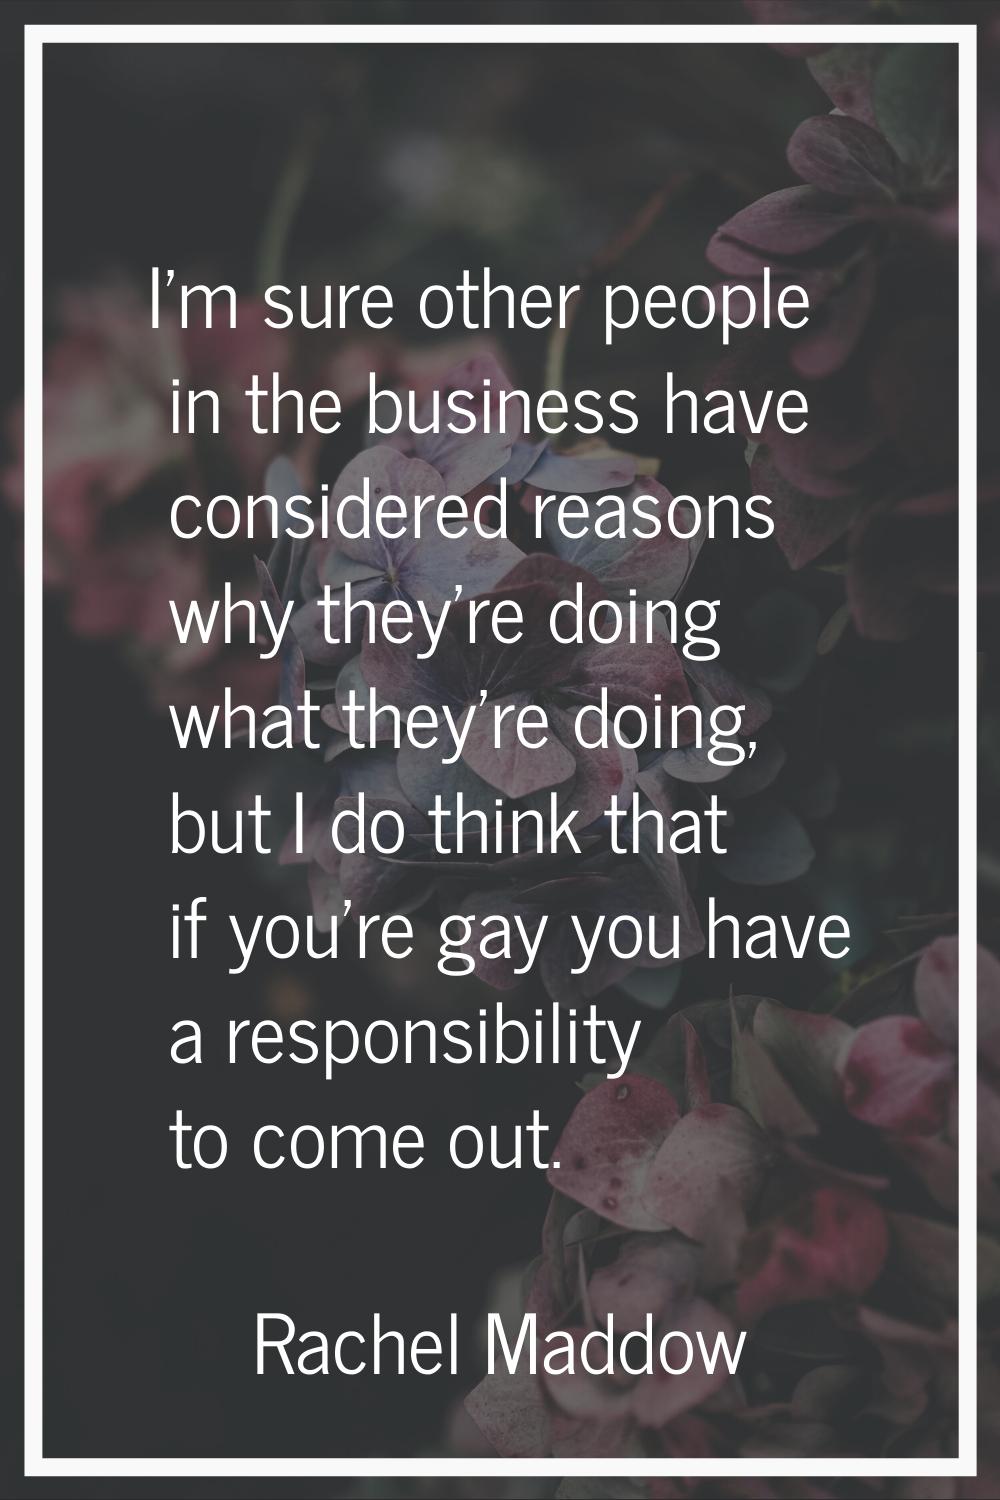 I'm sure other people in the business have considered reasons why they're doing what they're doing,